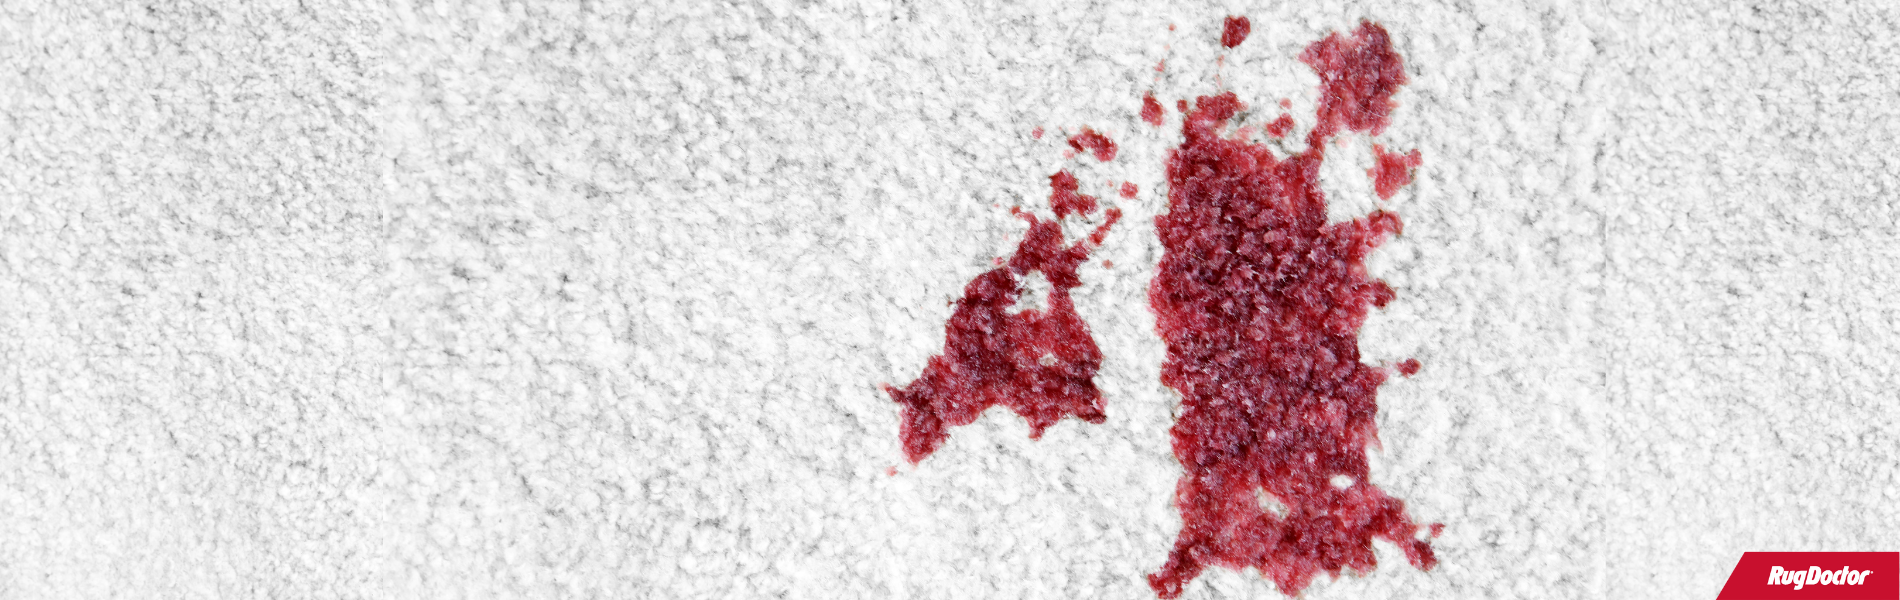 Small blood stain on bright white carpet